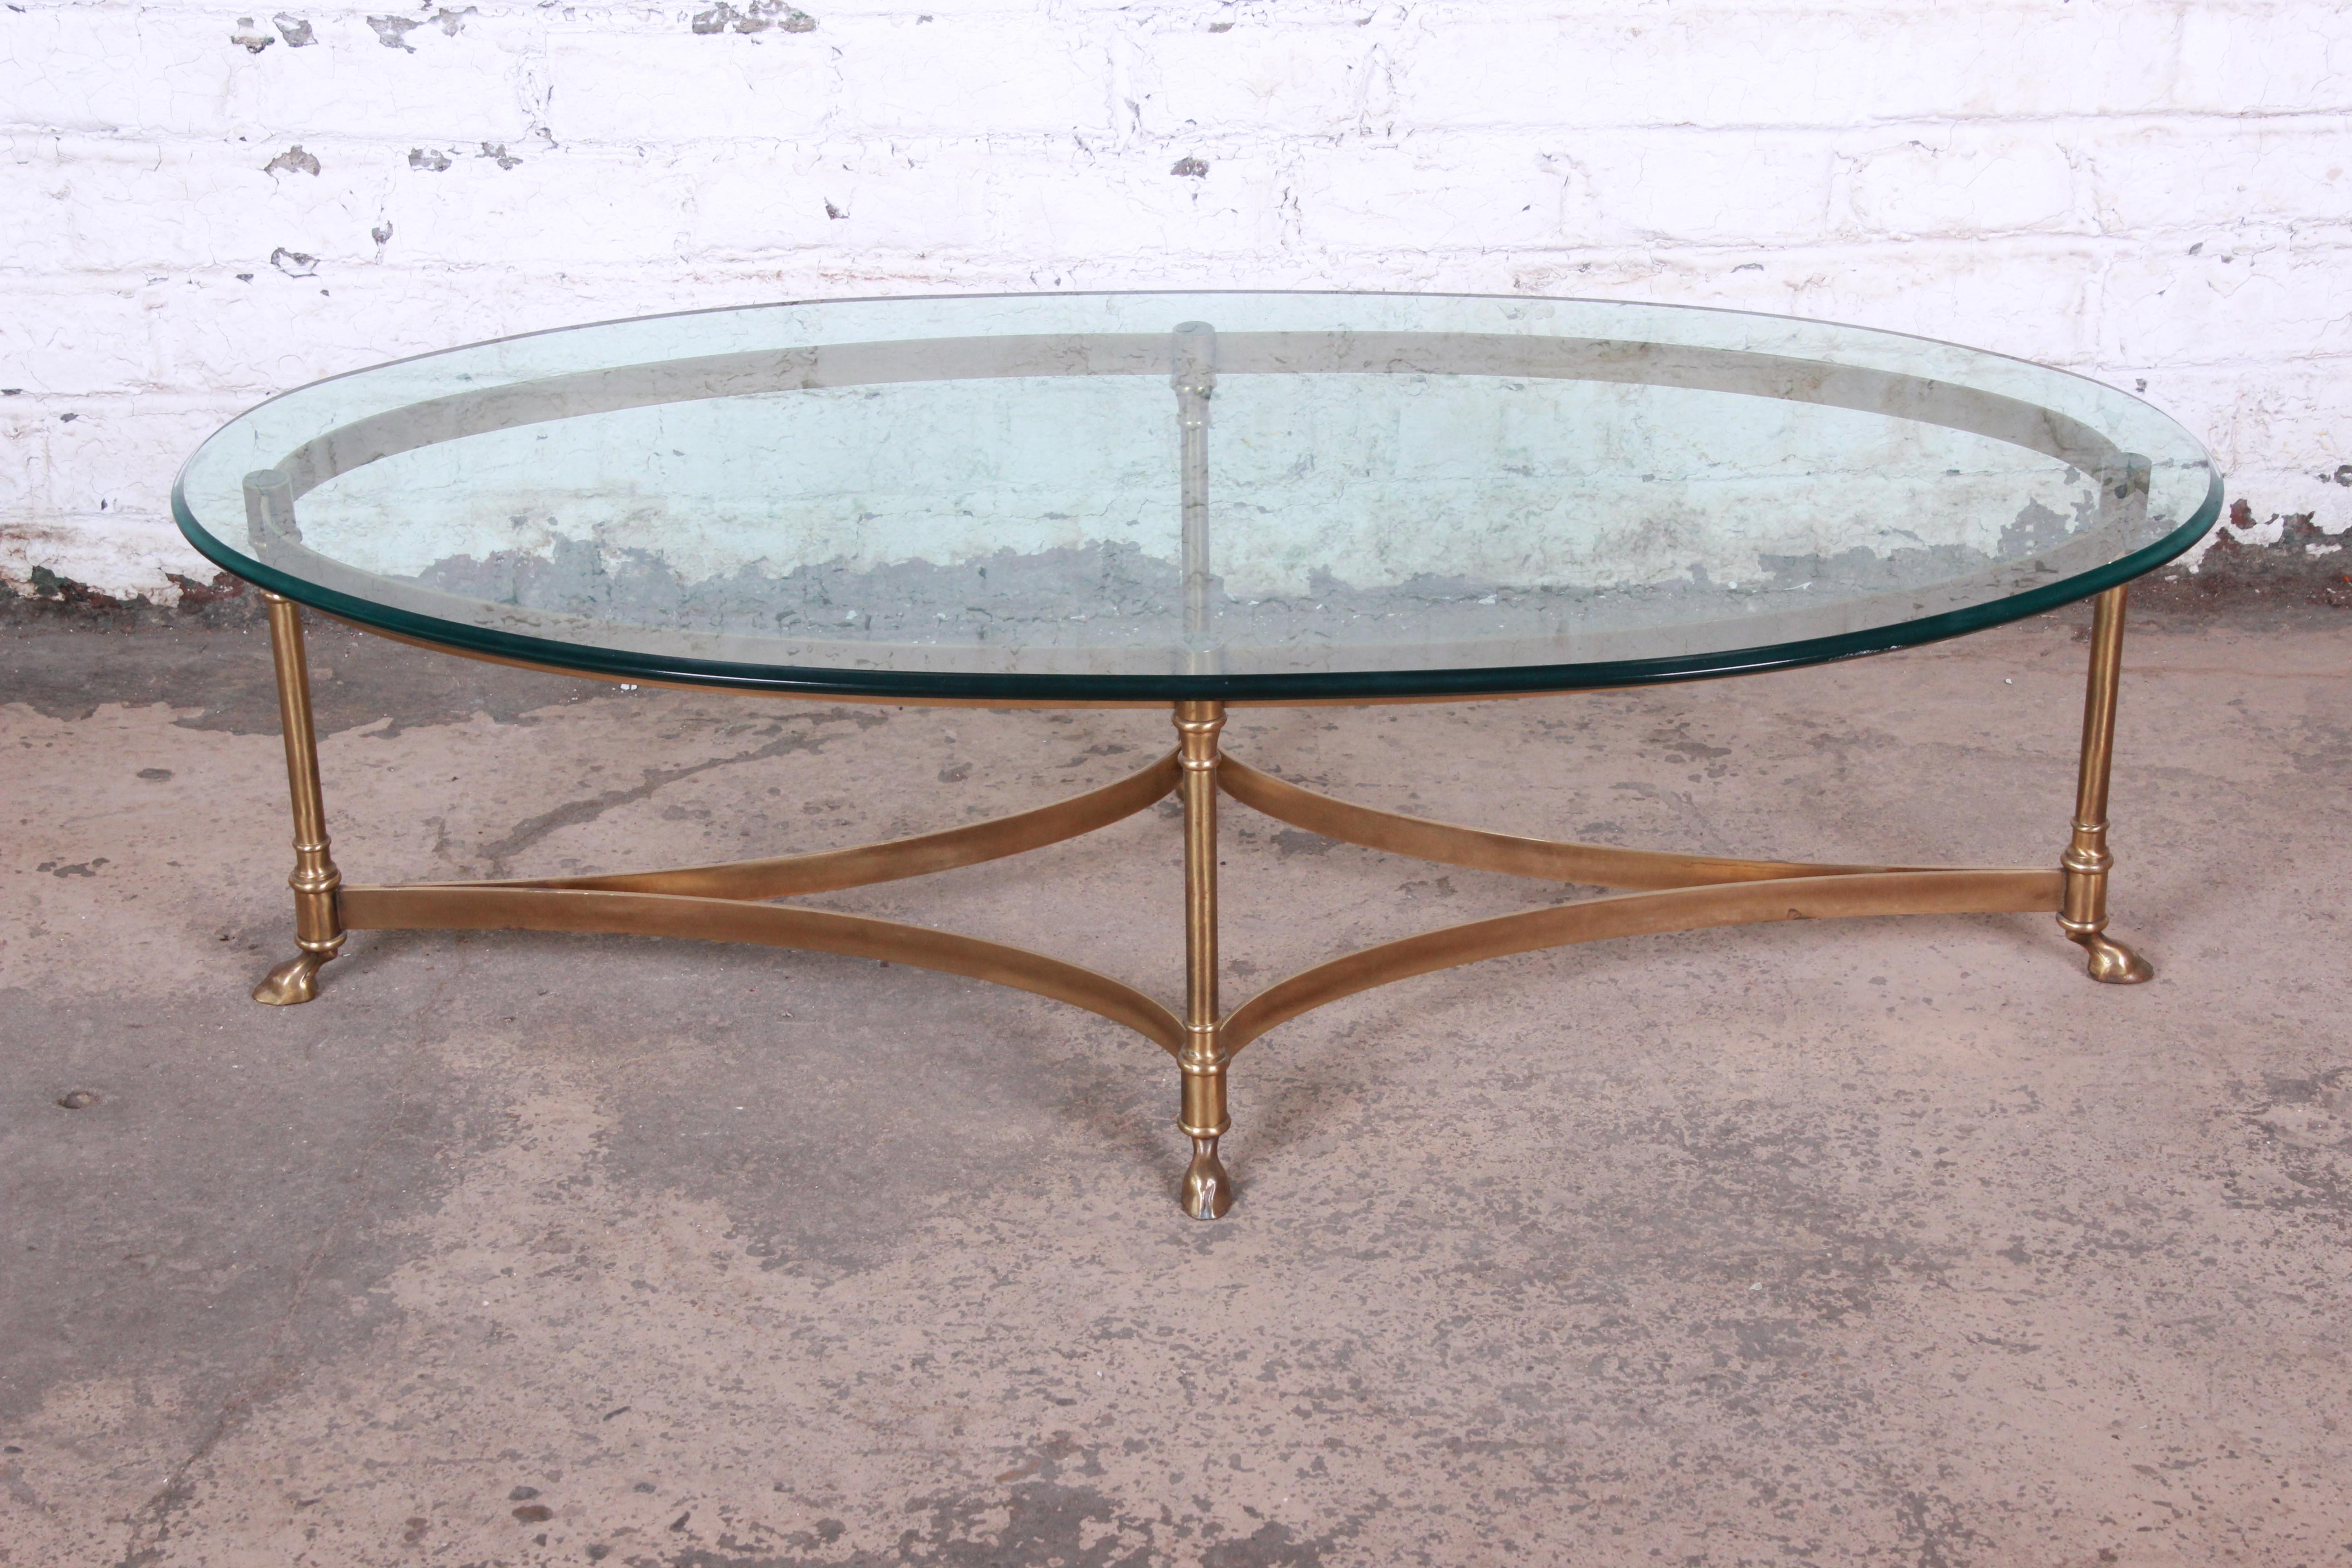 A gorgeous midcentury Hollywood Regency brass and glass coffee table by Labarge. The table features a stylish brass base with curved stretchers and unique hooved feet. The beveled glass top is in very good condition. Overall the table is in